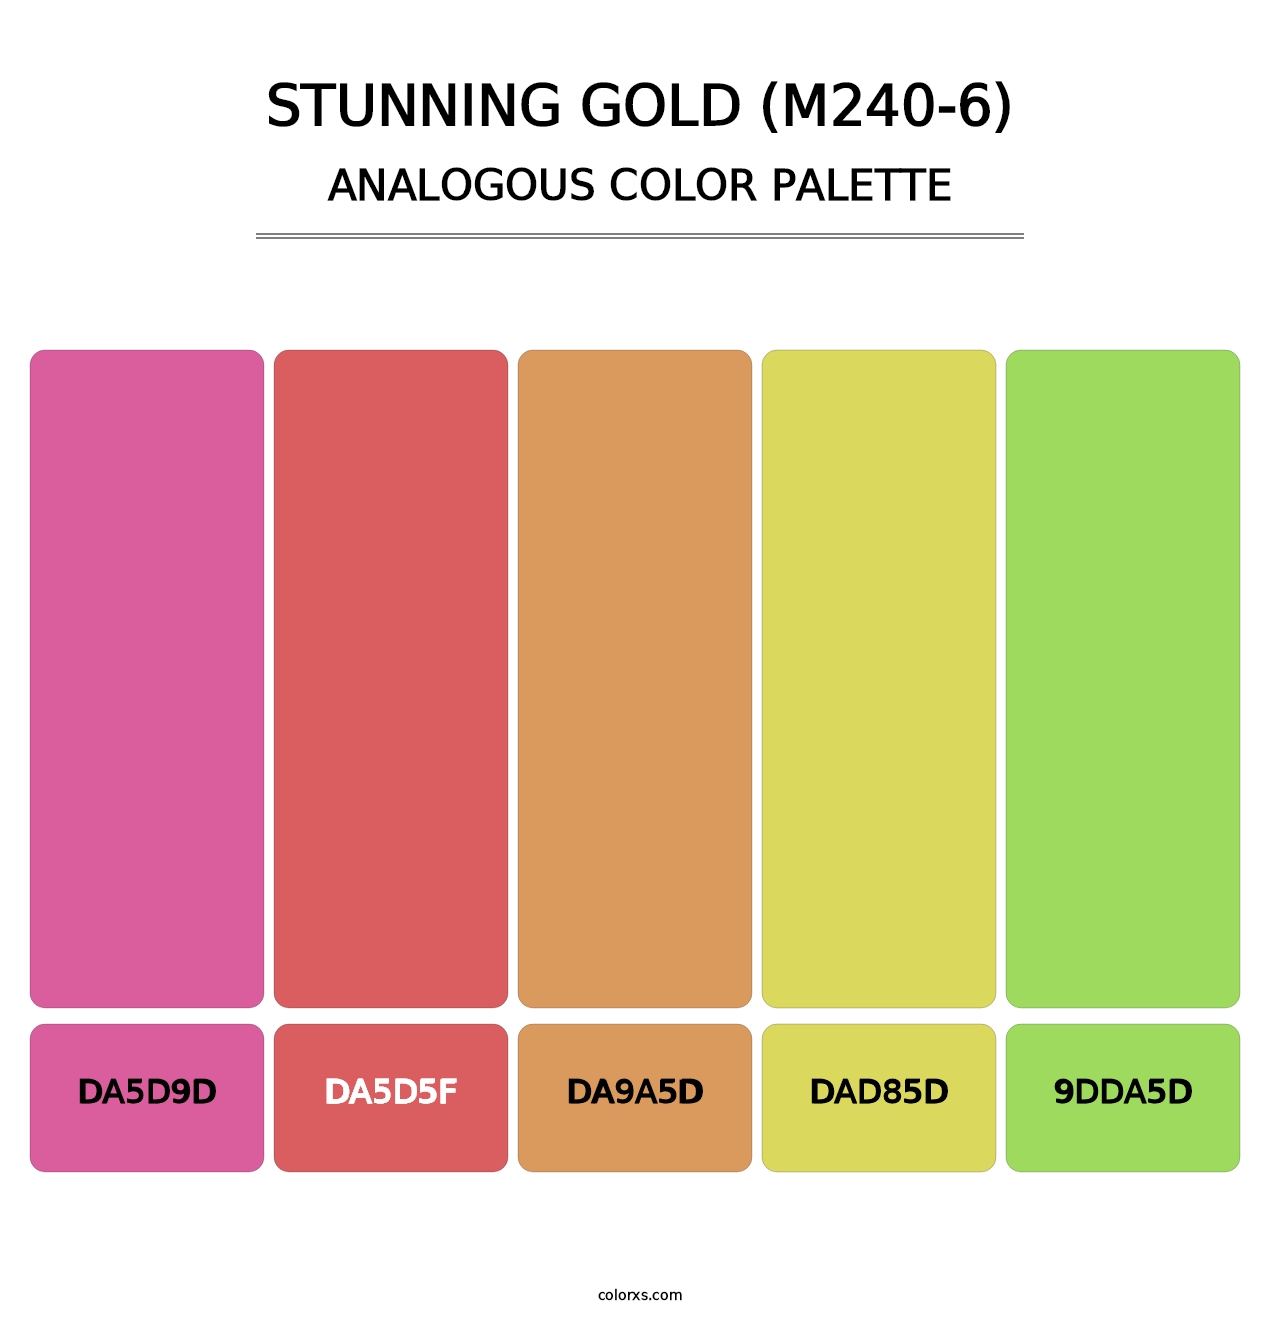 Stunning Gold (M240-6) - Analogous Color Palette